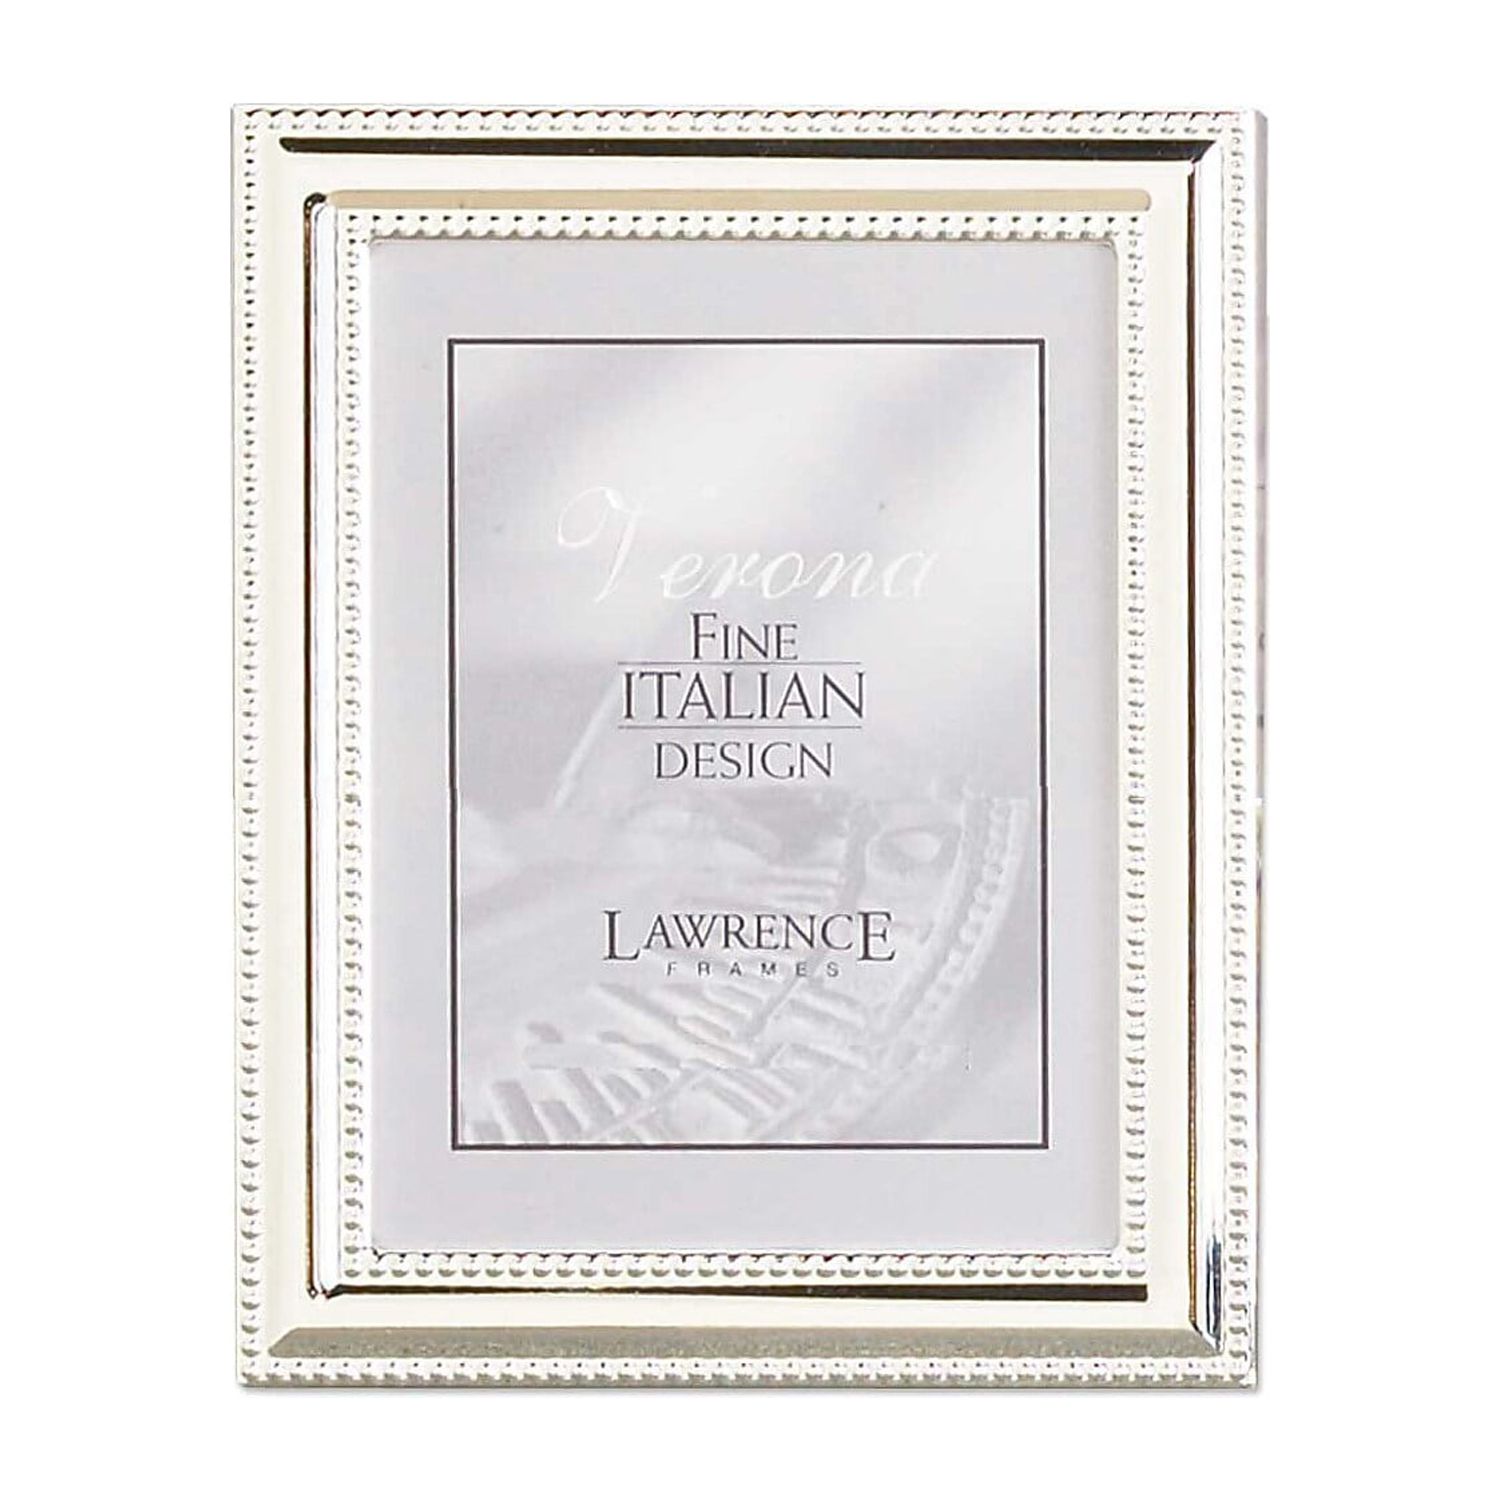 Lawrence Frames 4x5 Metal Picture Frame Silver-Plate with Delicate Beading 510745 - image 1 of 2